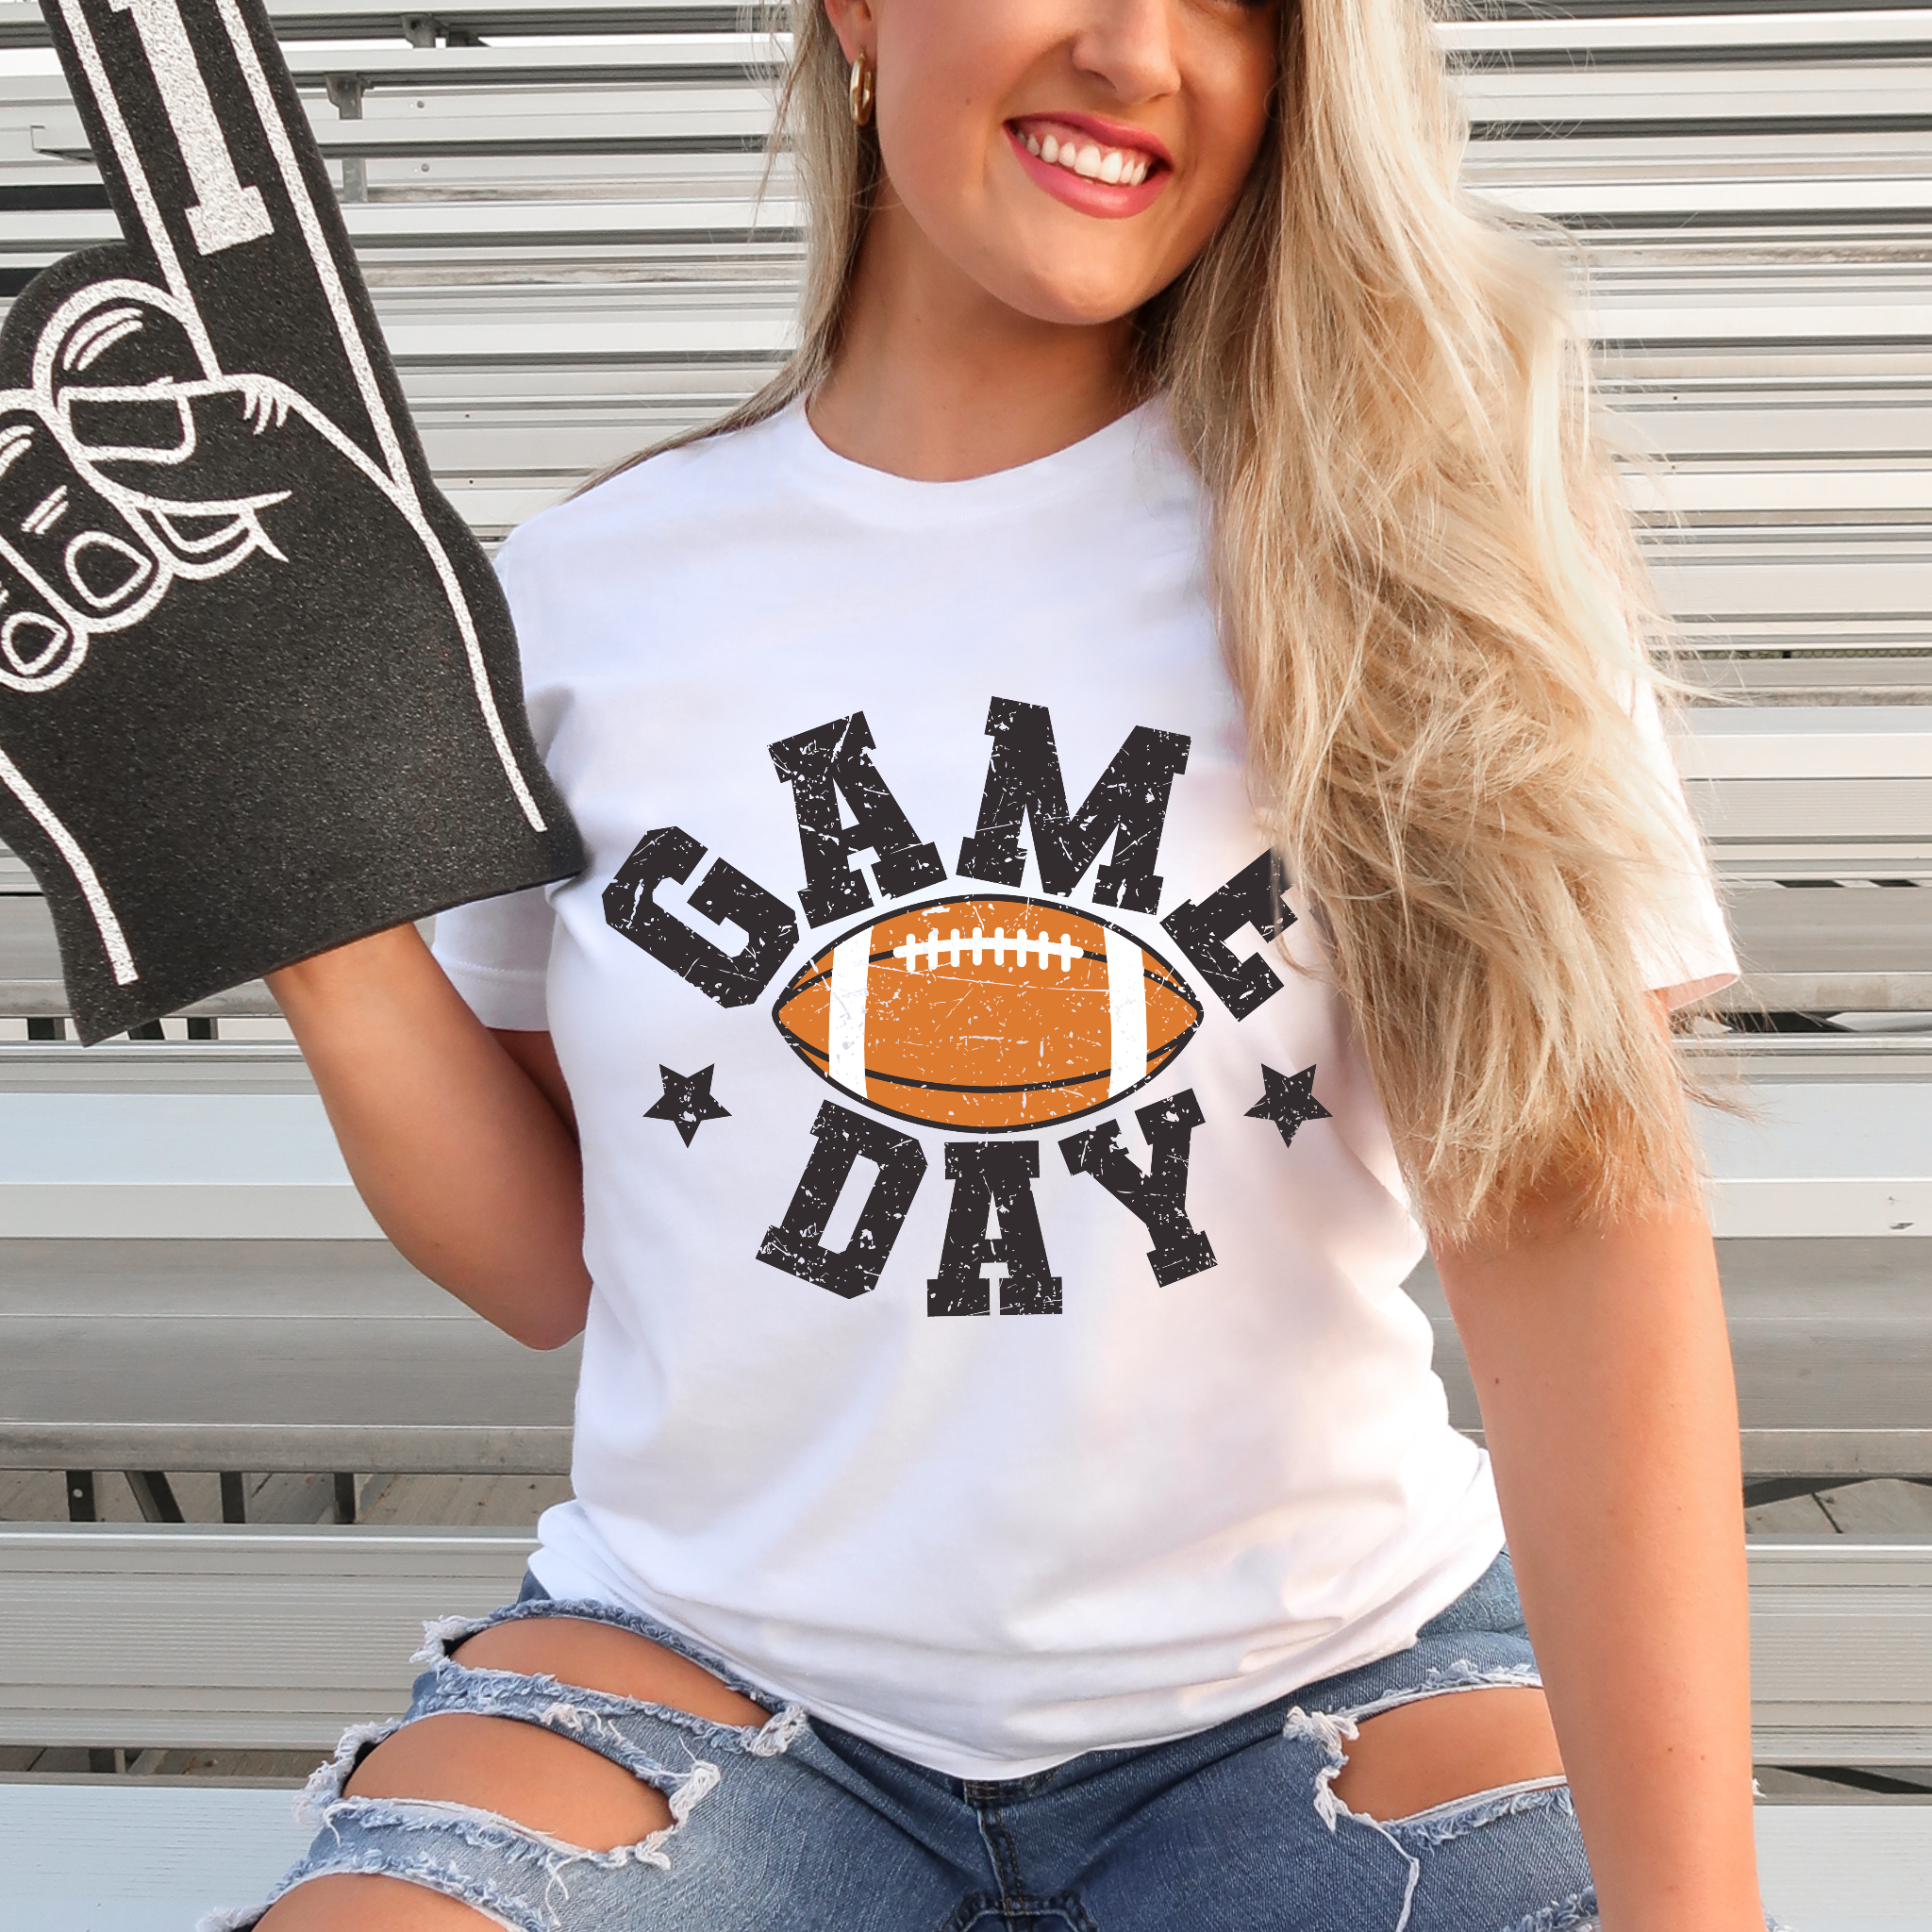 Game Day Sublimation Transfer